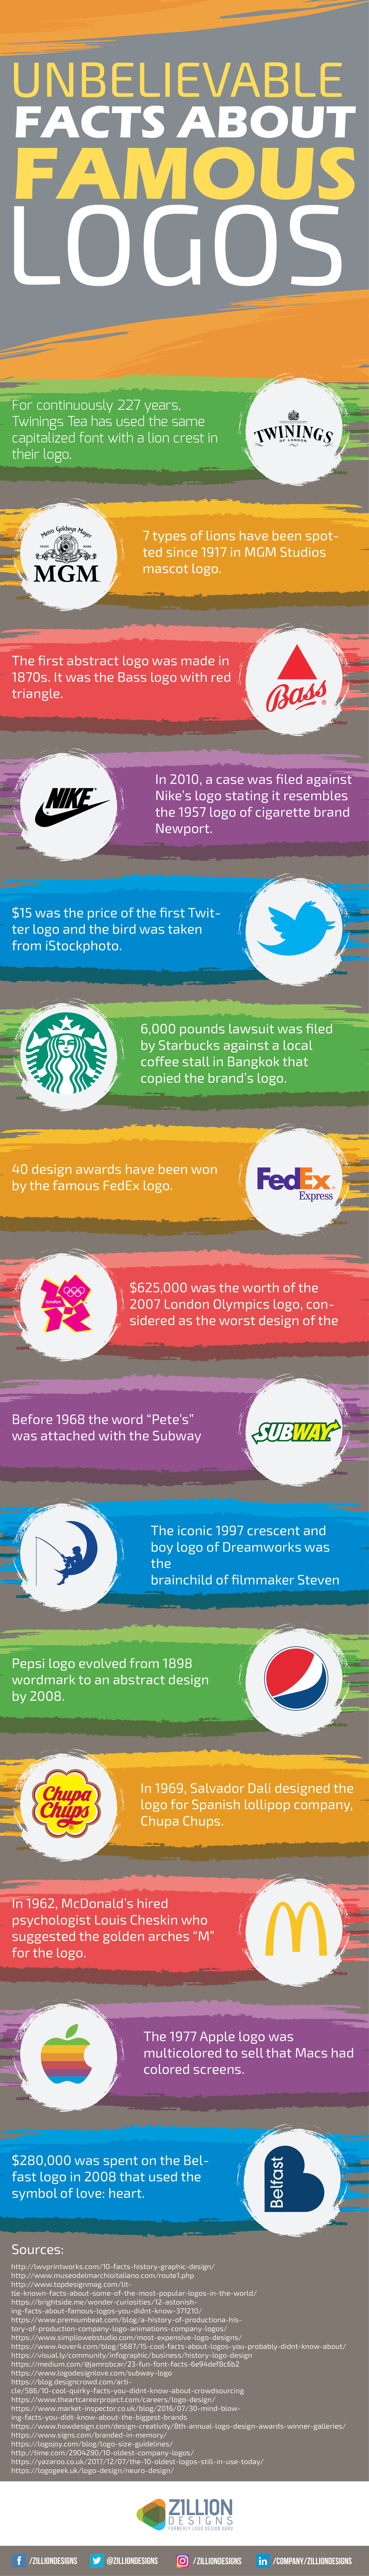 20 famous logos with 20 fun facts